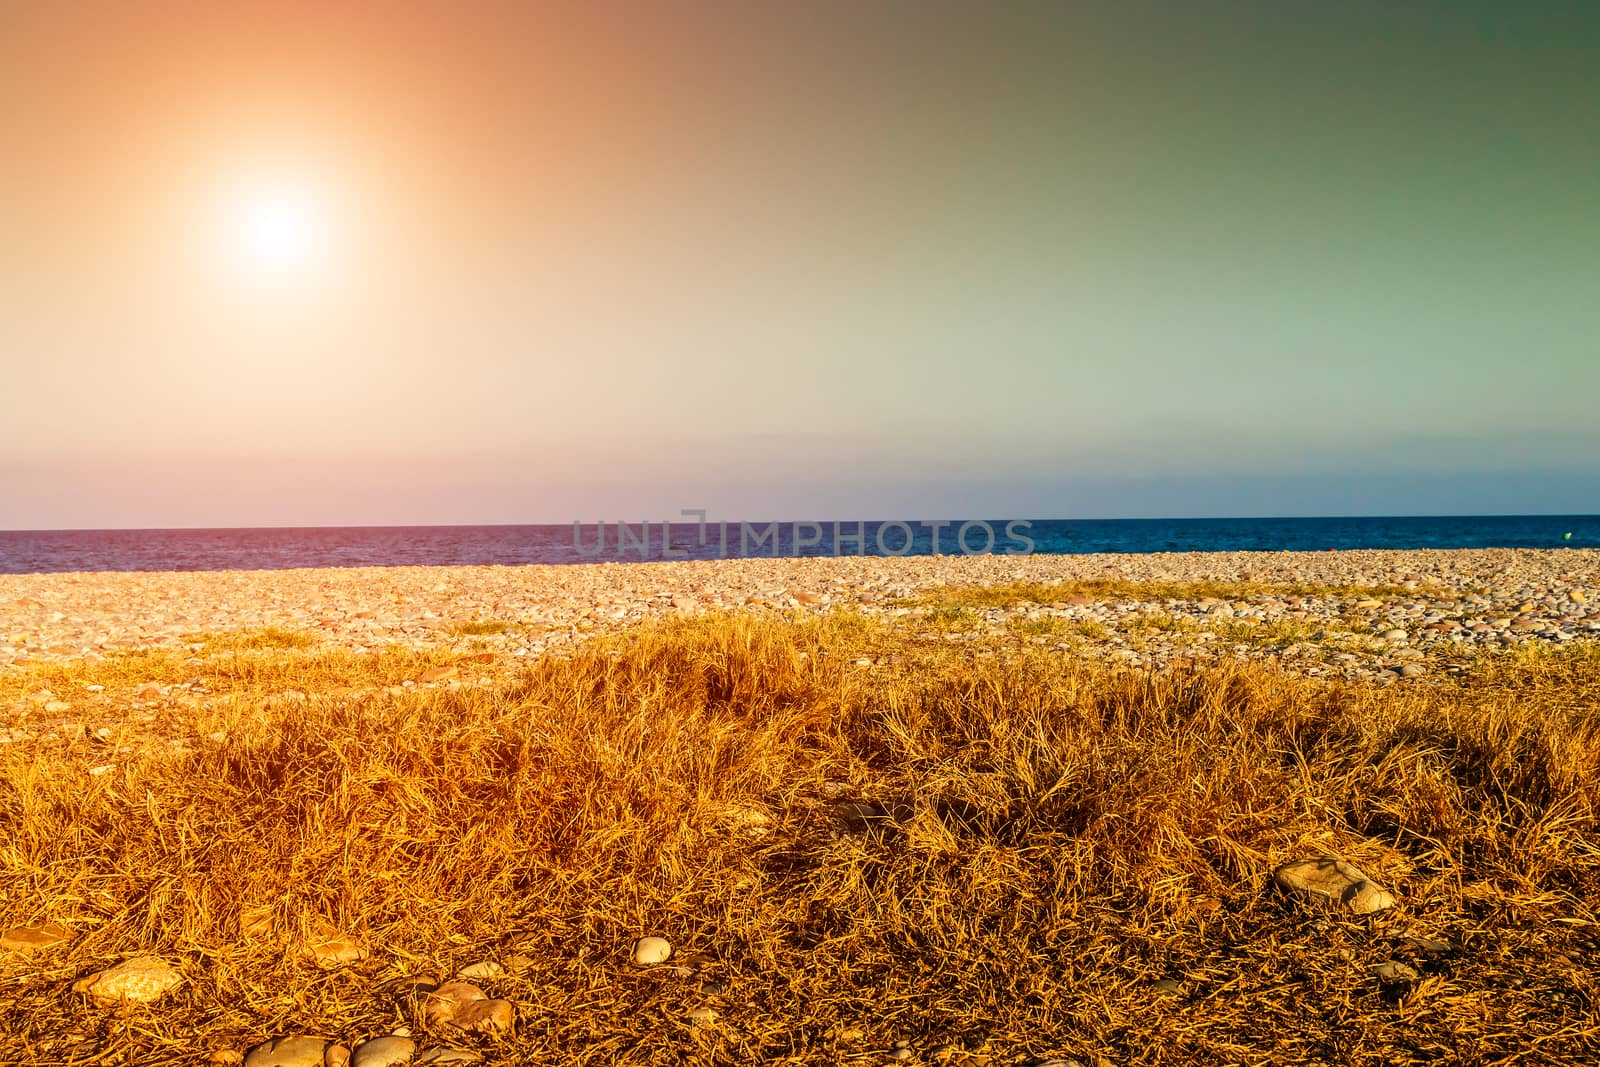 Sunset on the beach with the sea in the background. Horizontal image.